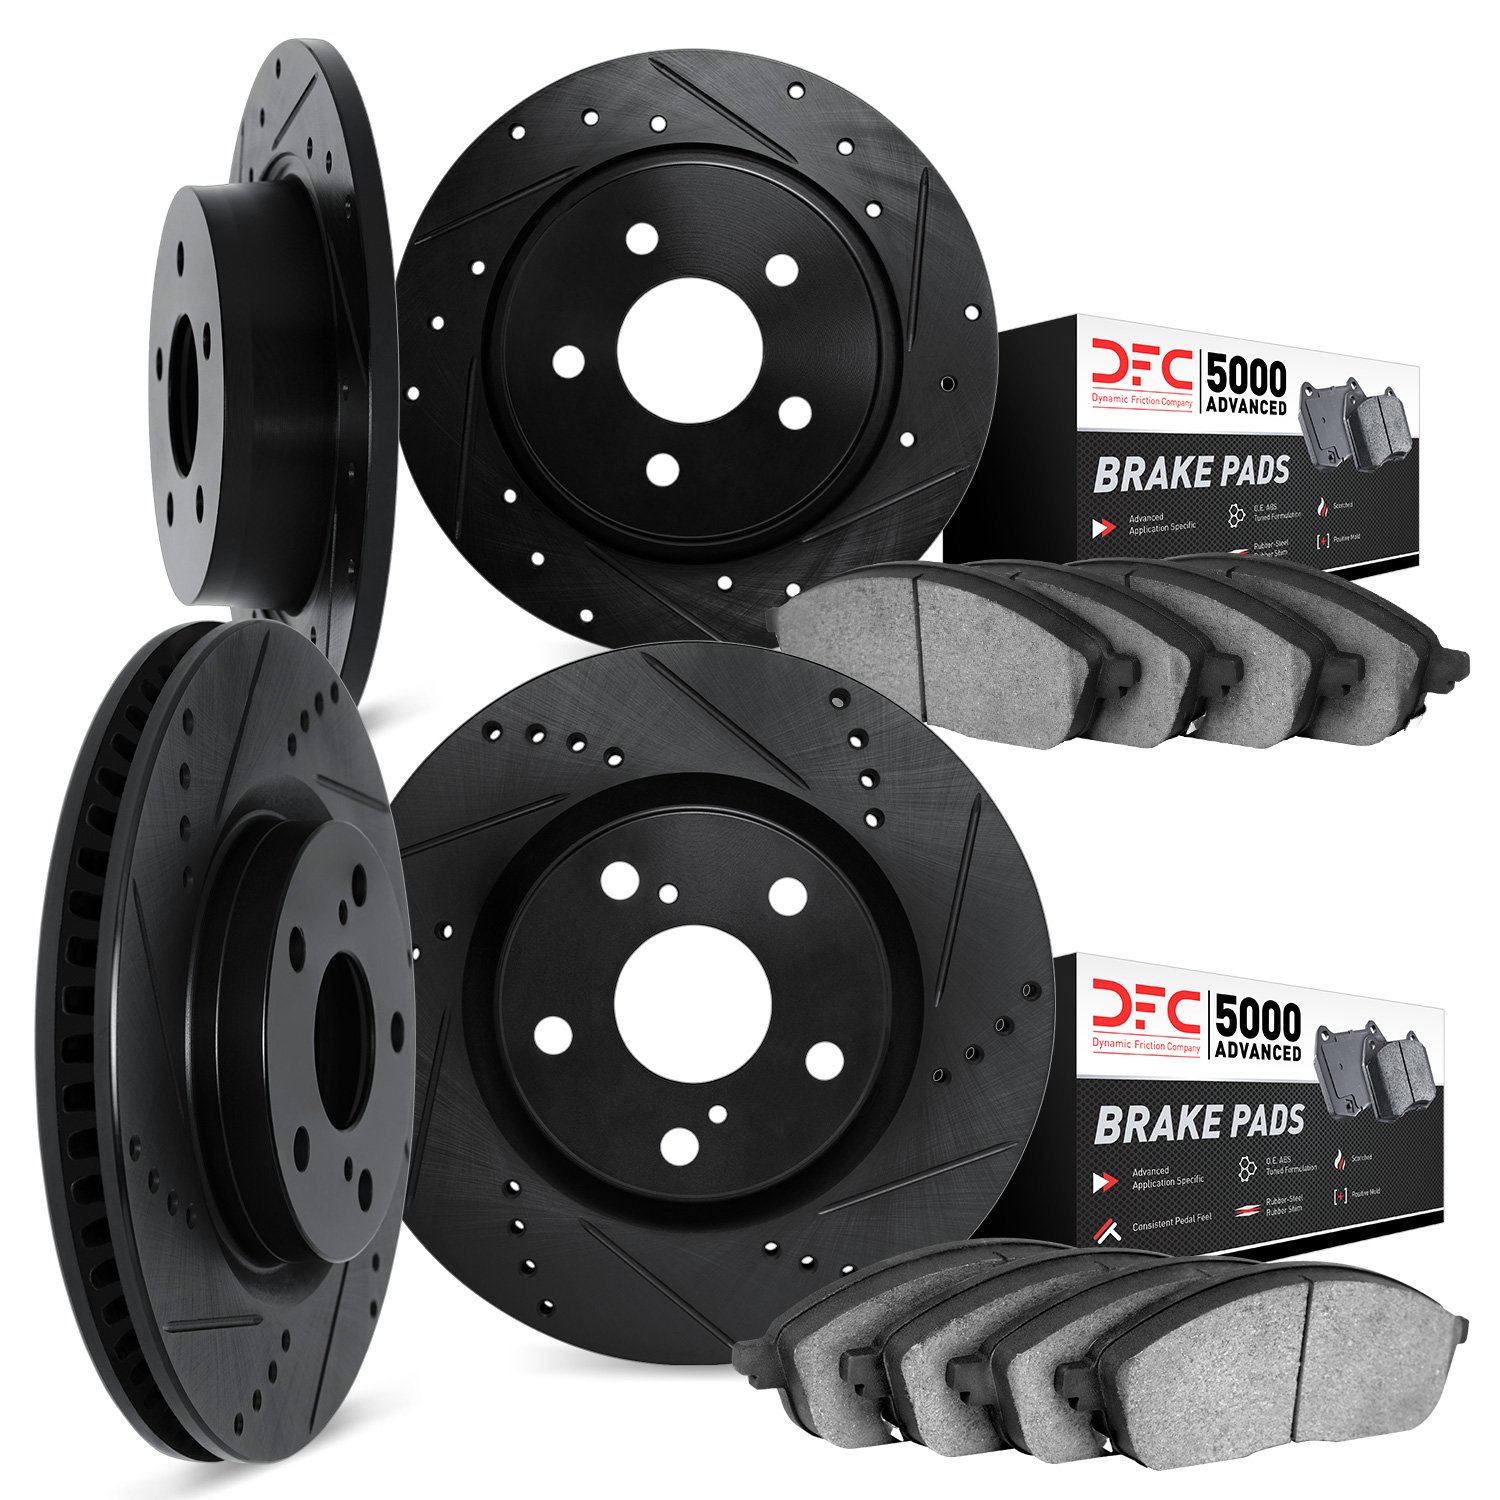 8504-58006 Drilled/Slotted Brake Rotors w/5000 Advanced Brake Pads Kit [Black], 2015-2020 Acura/Honda, Position: Front and Rear